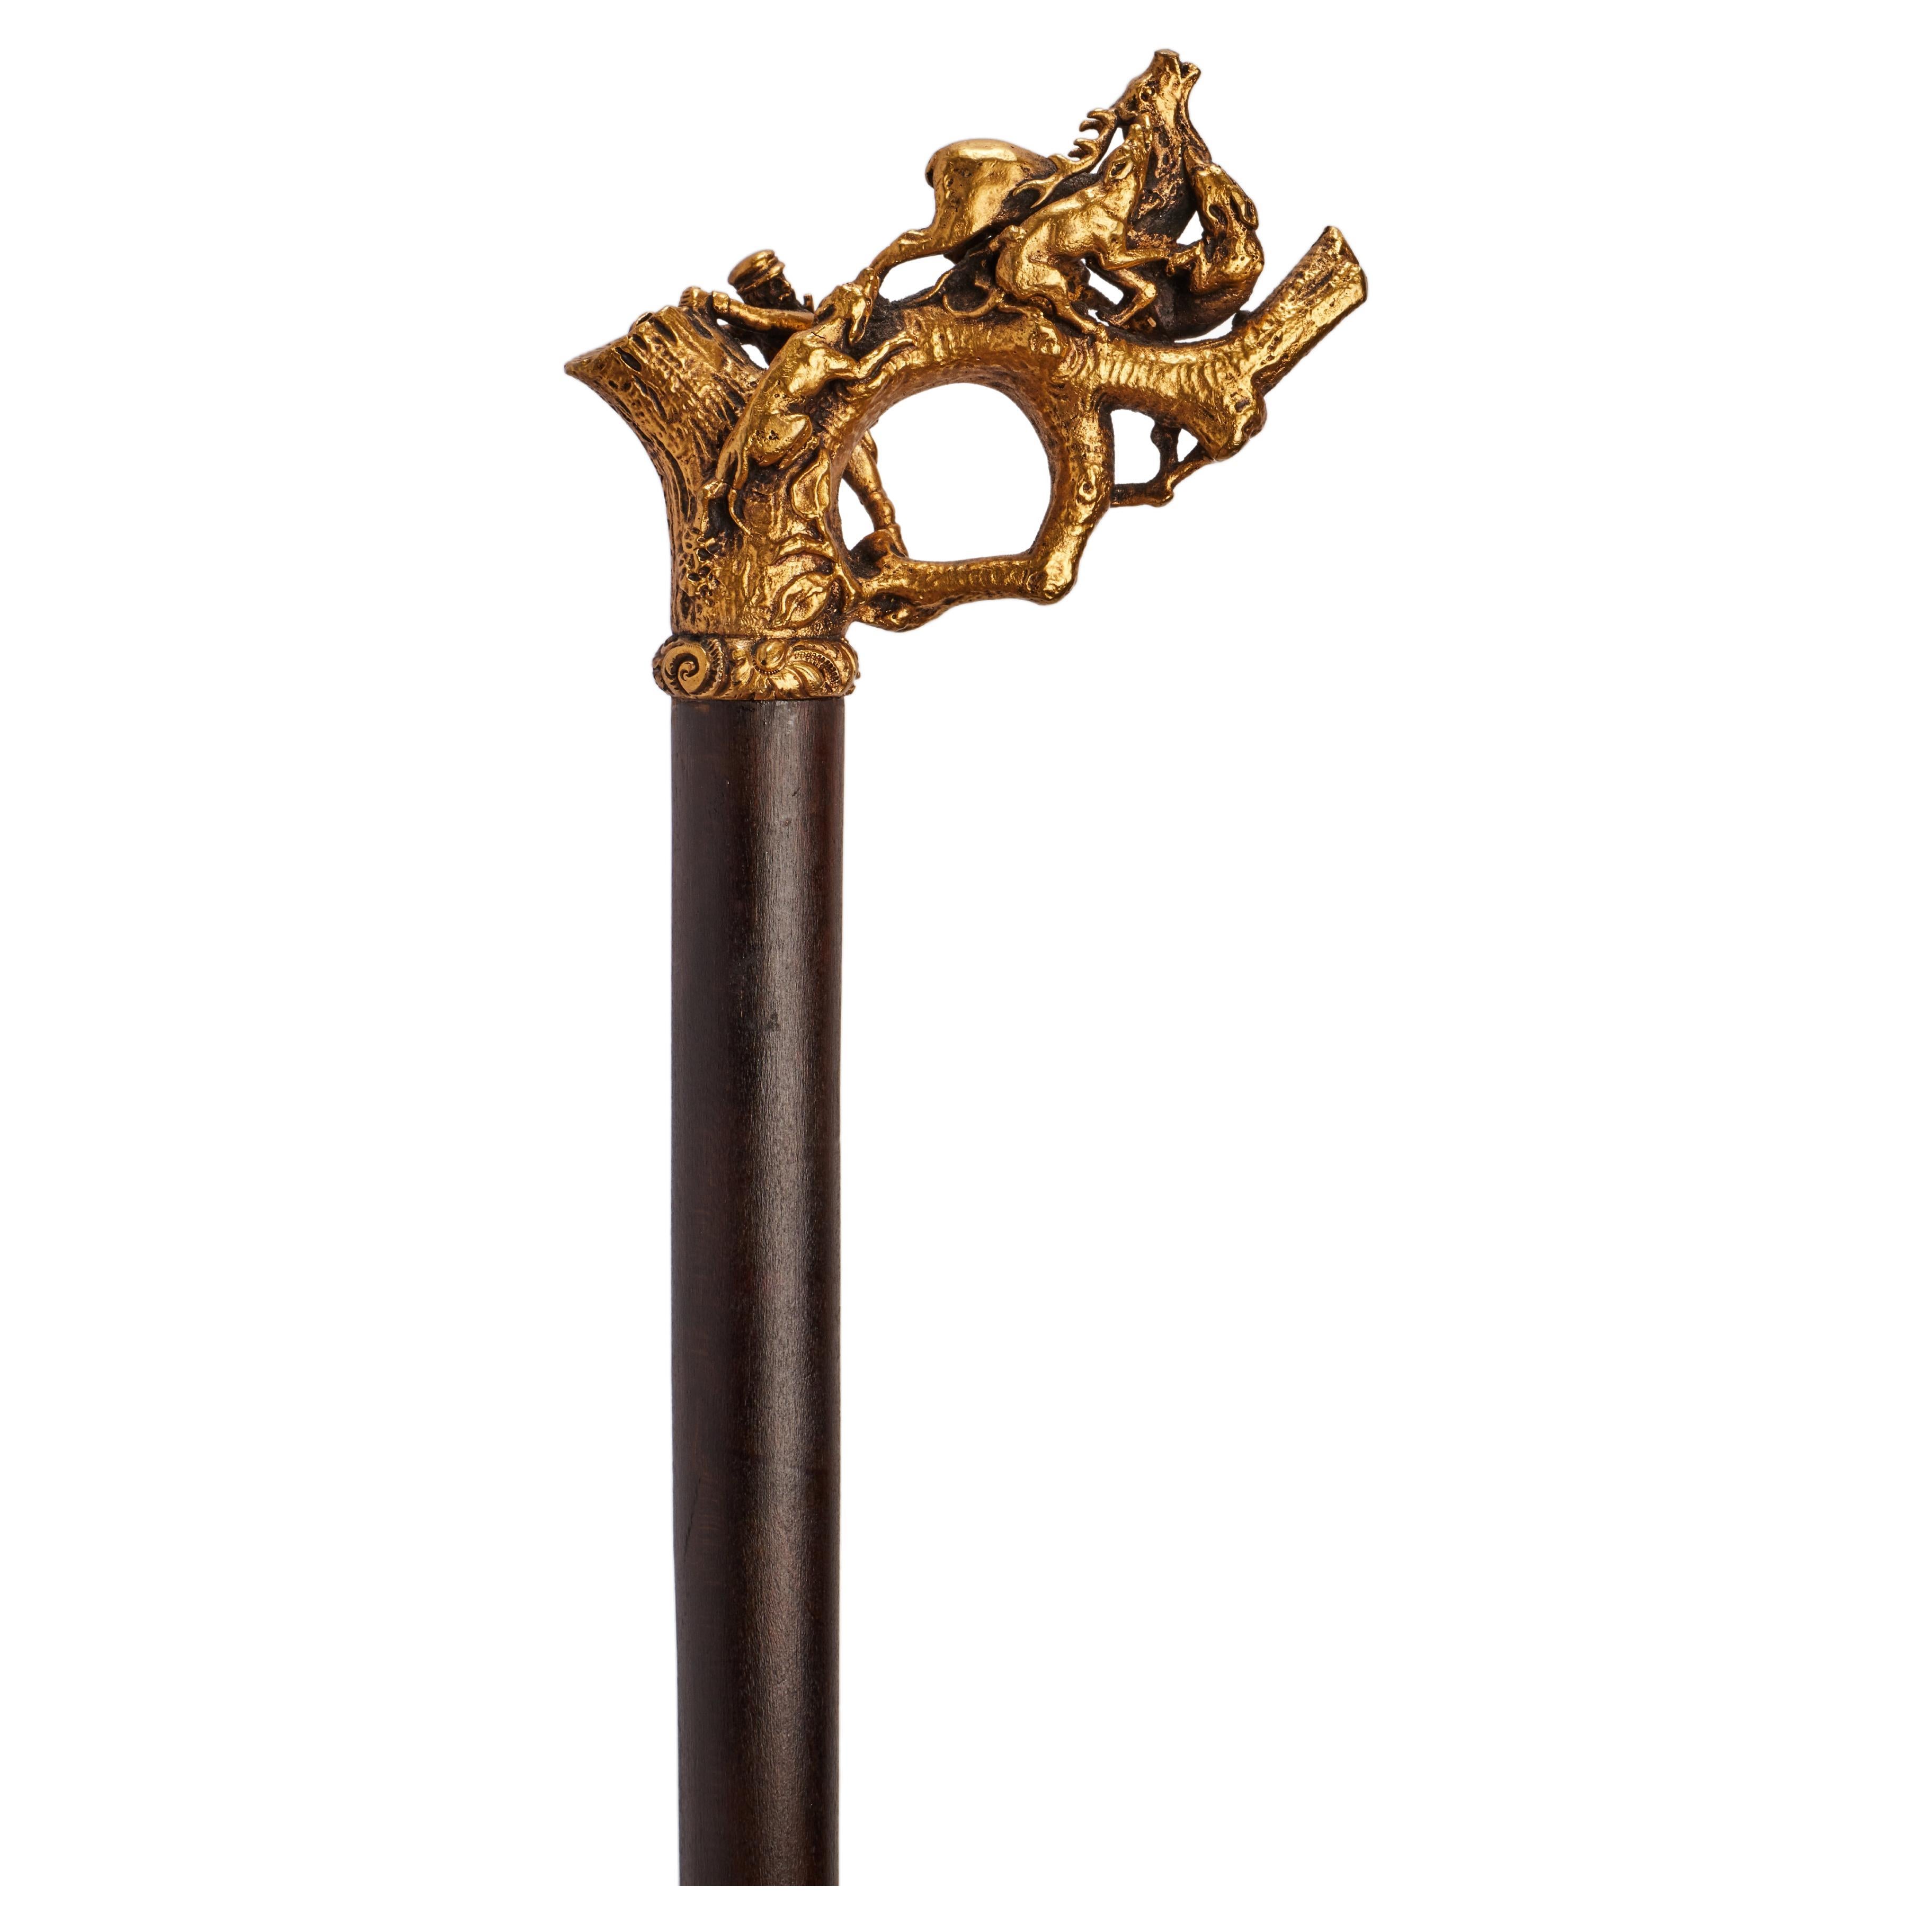 Silver gilt handle walking stick depicting an hunting scene, Germany 1890. 